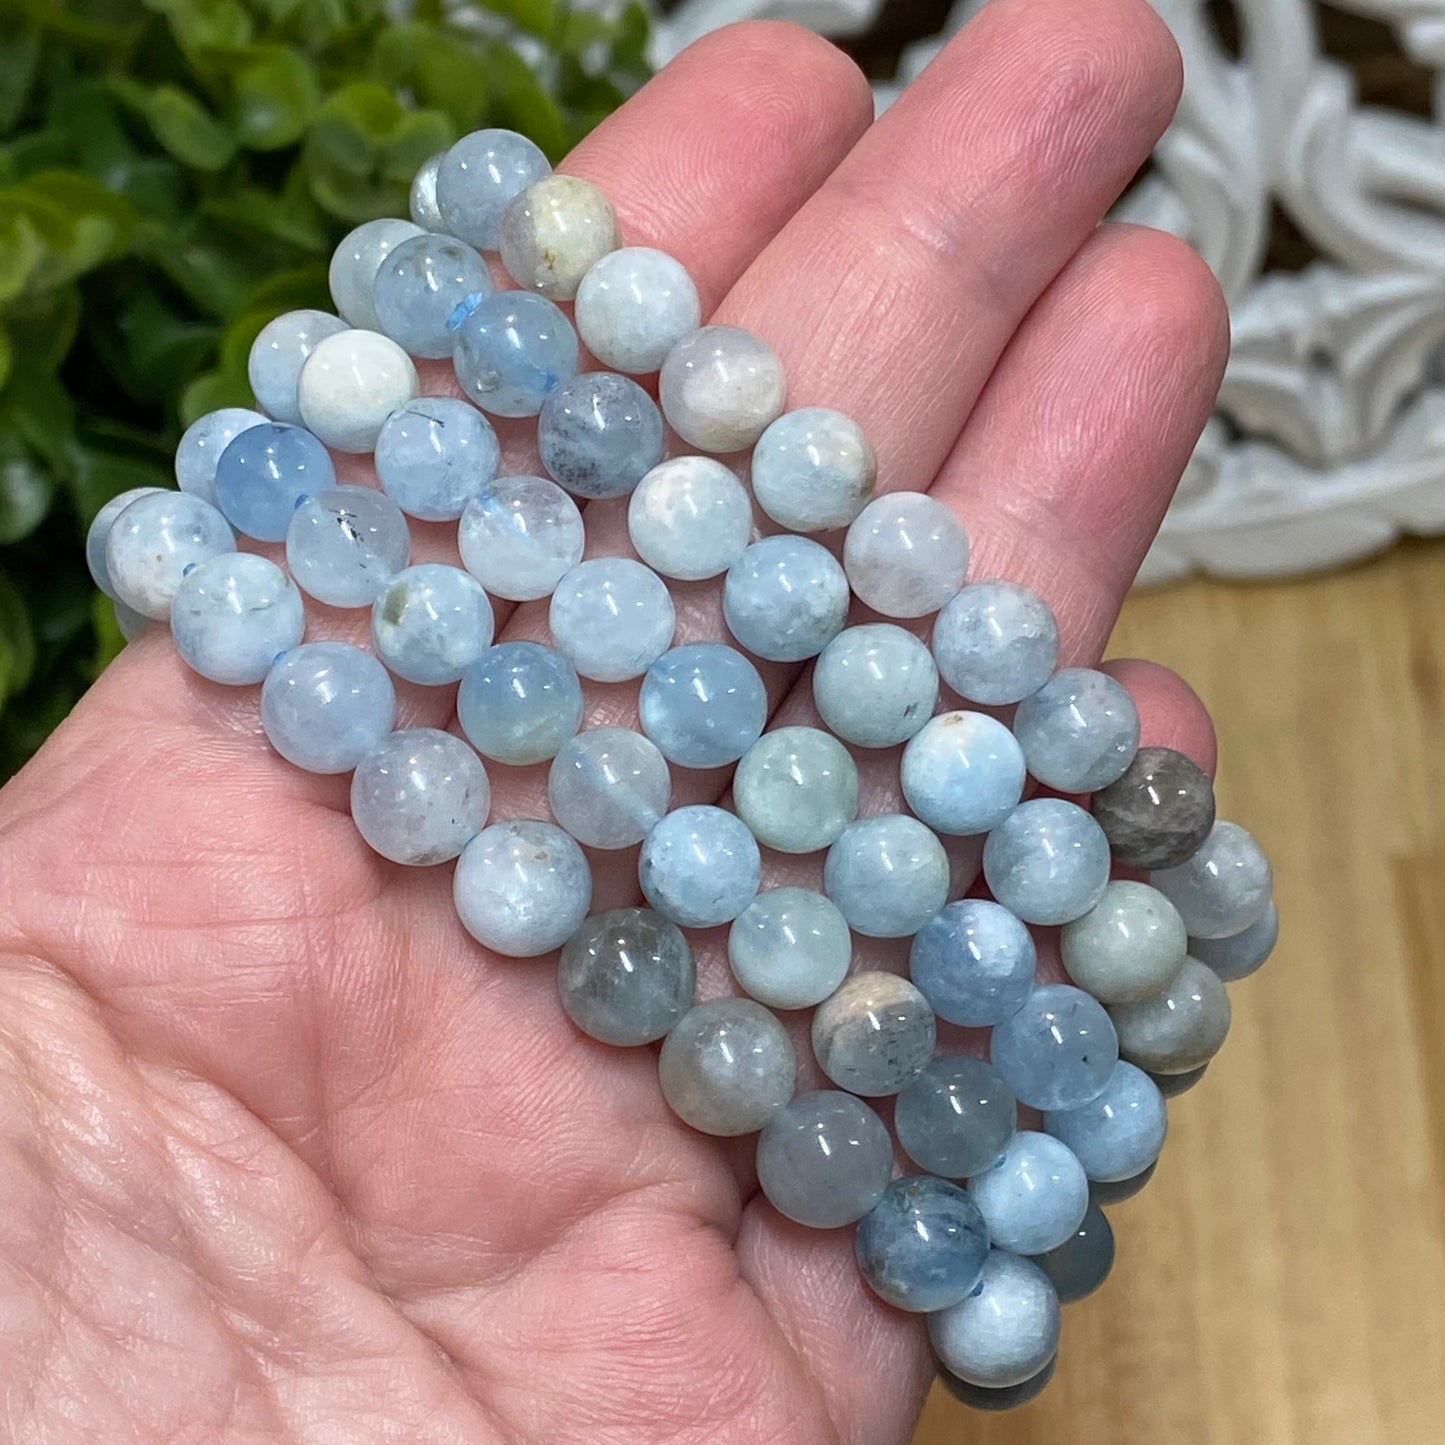 Aquamarine Bead Bracelet - Courage, Calming and Intuition